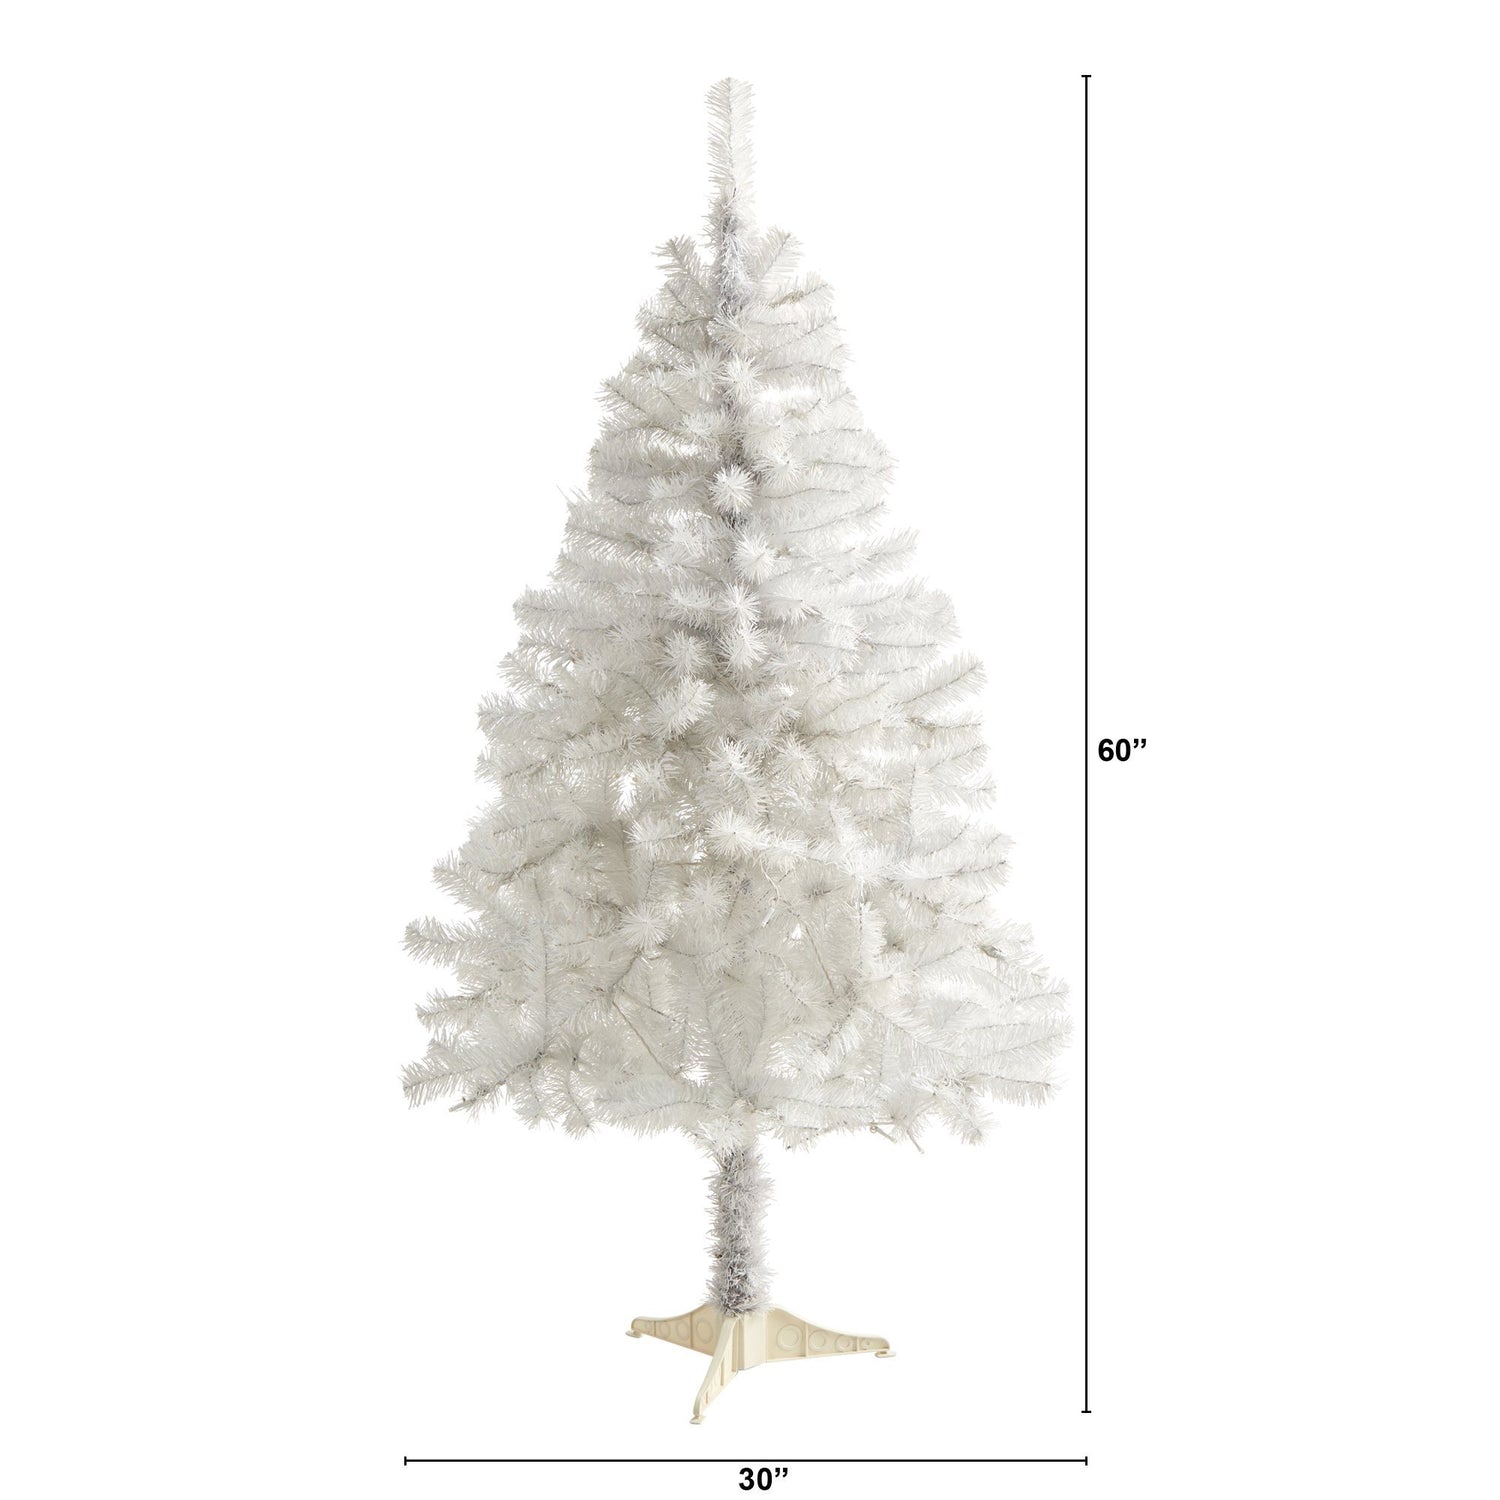 5' White Artificial Christmas Tree with 350 Bendable Branches